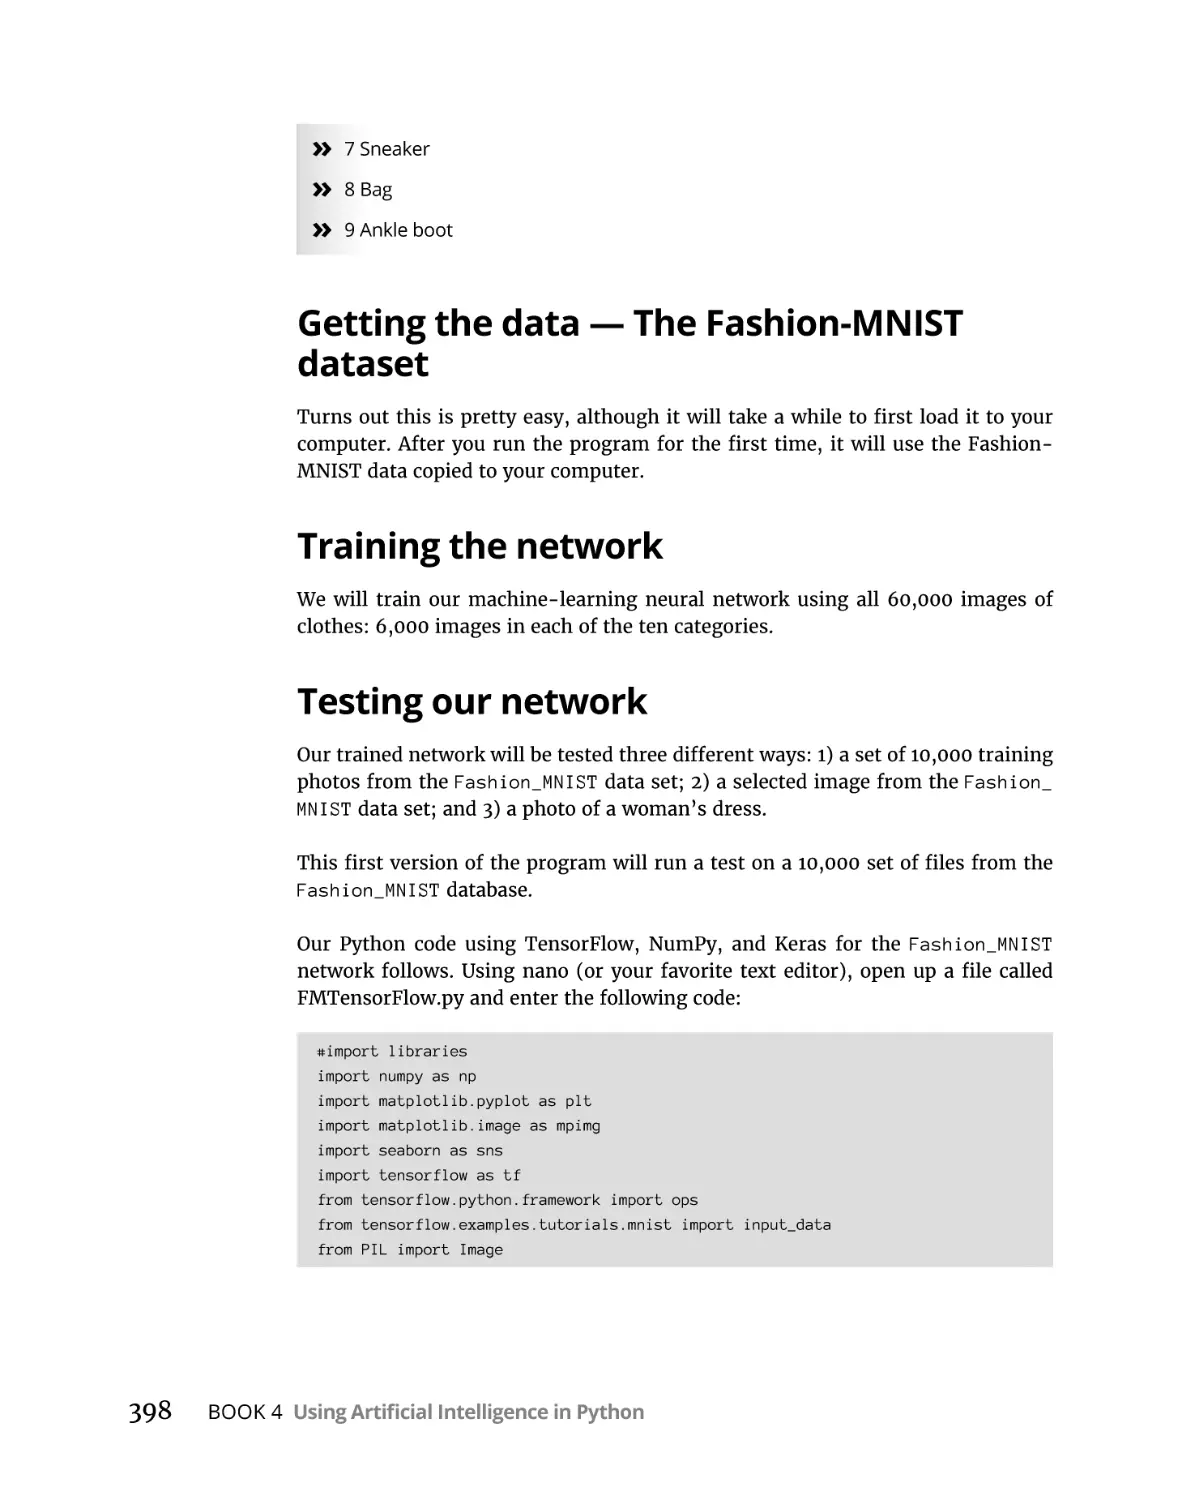 Getting the data — The Fashion-MNIST dataset
Training the network
Testing our network